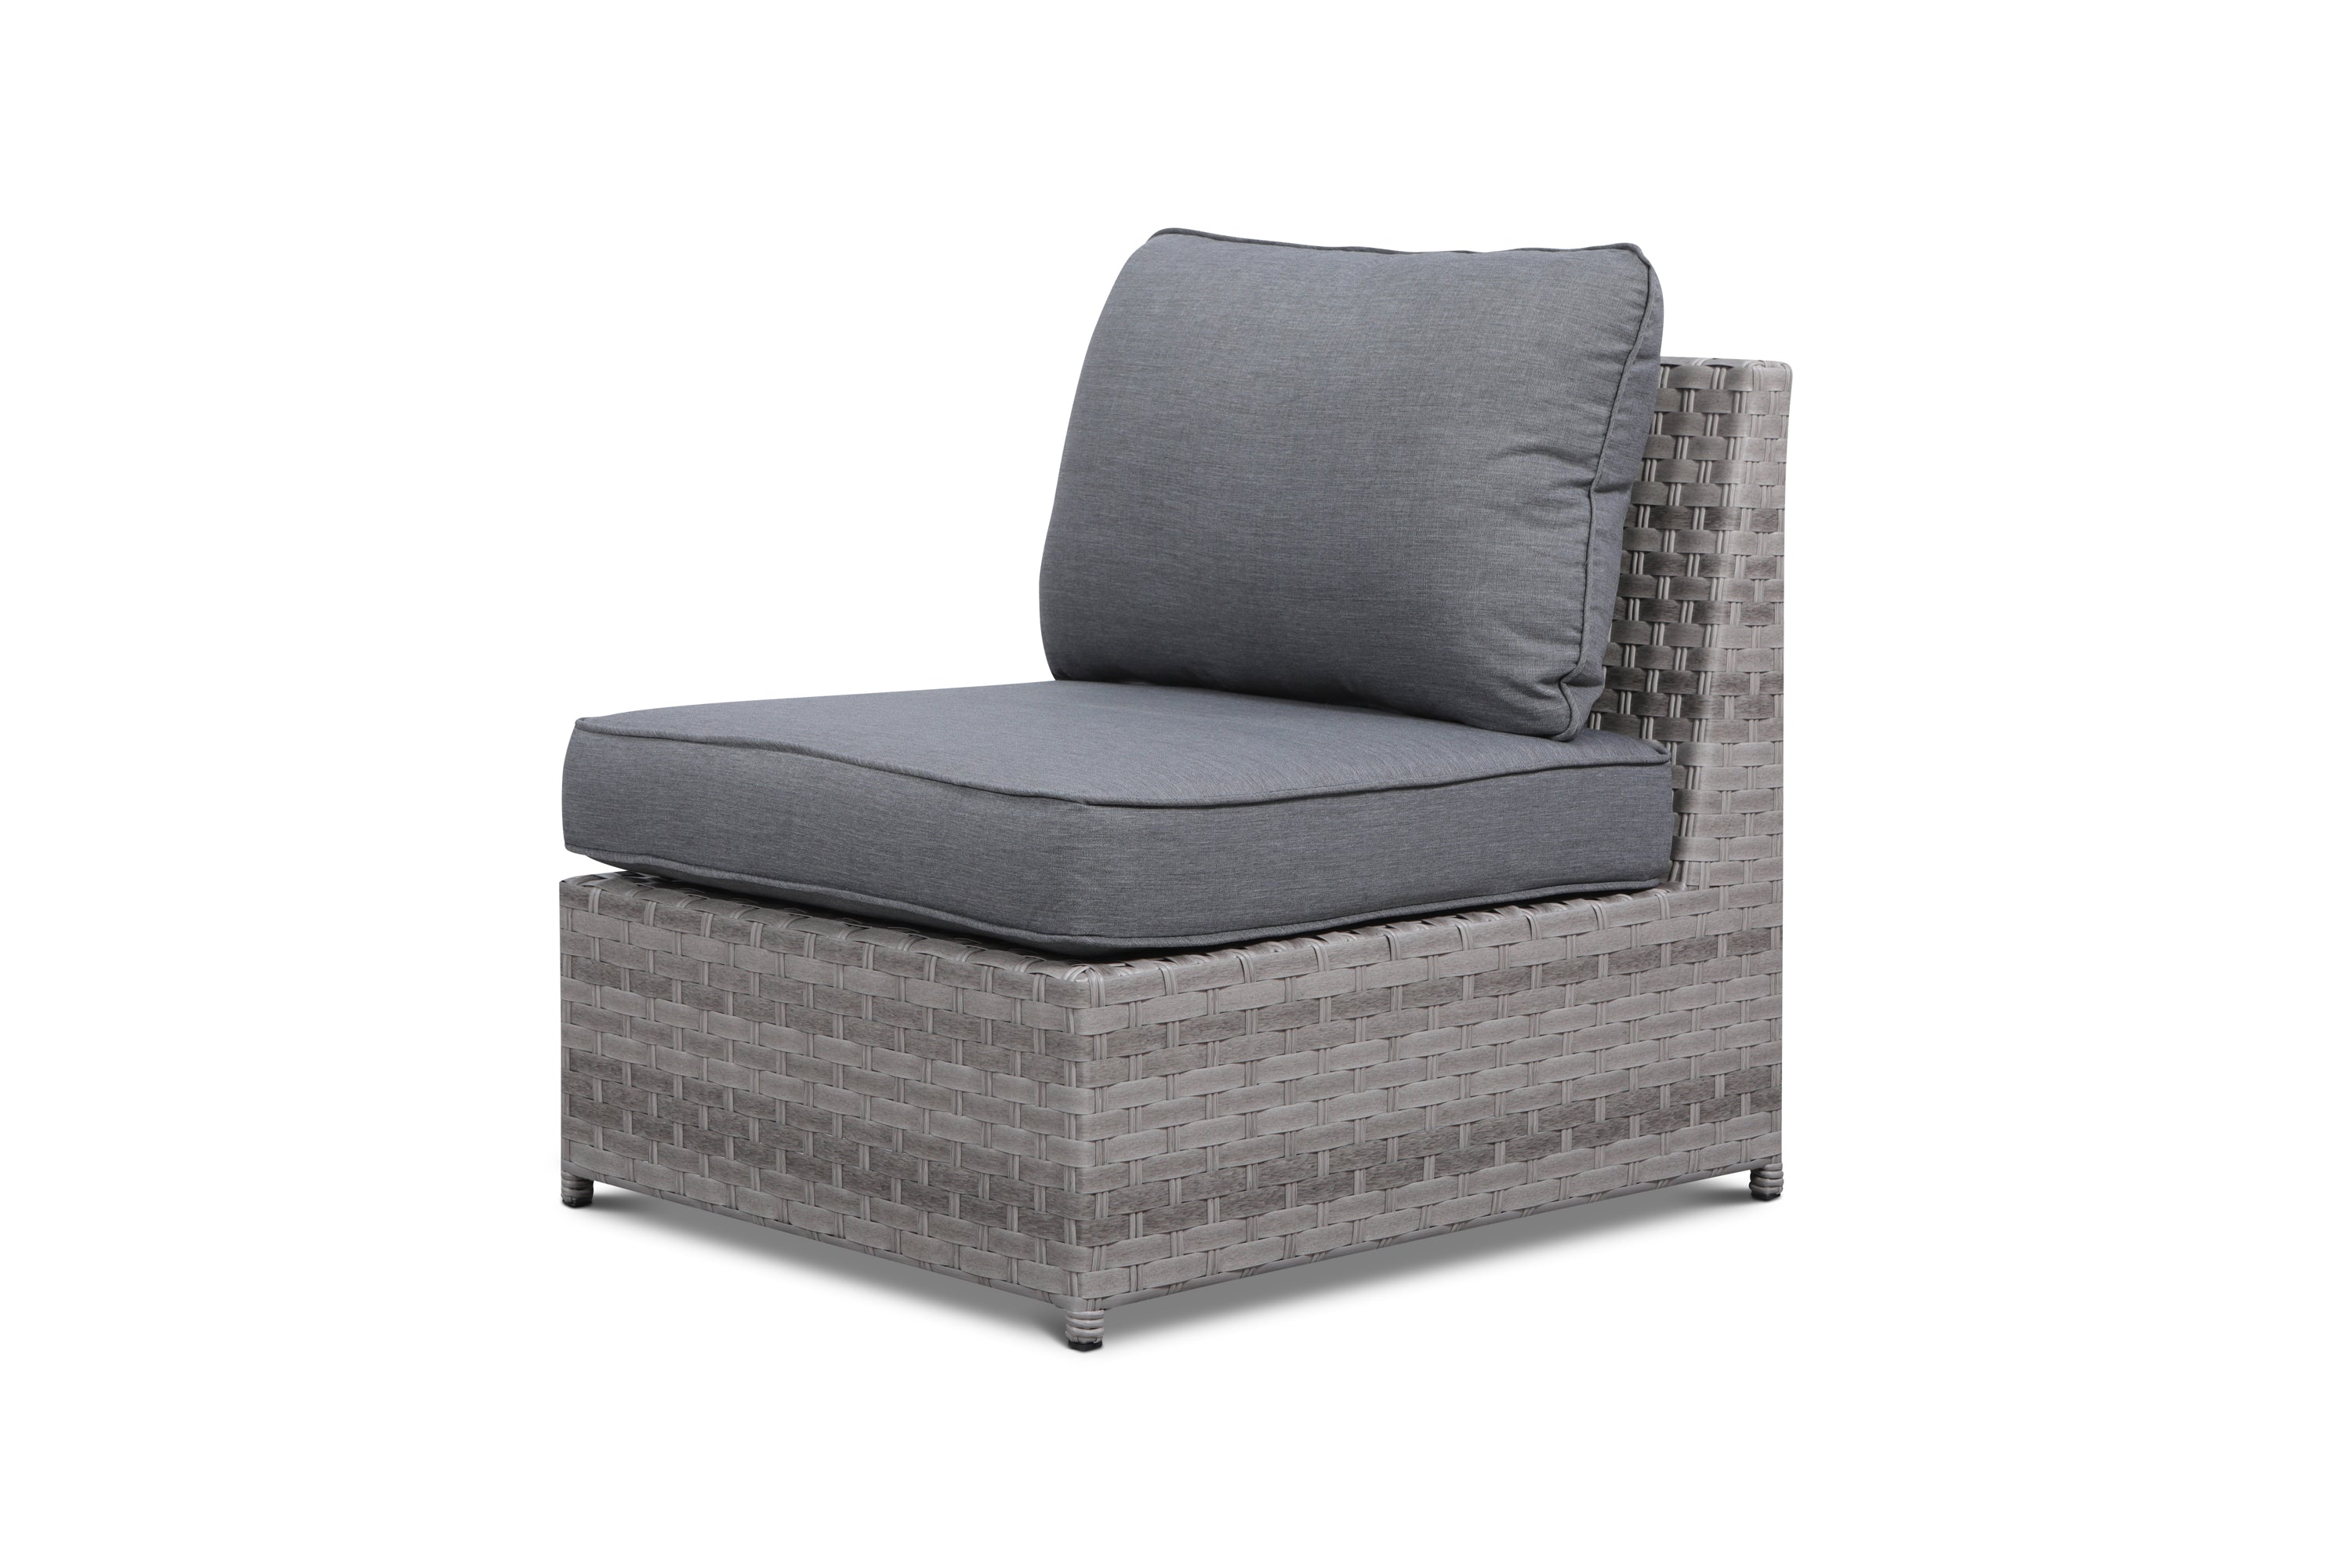 Kensington Grey 11 Piece Outdoor Wicker Large Sofa Set with End Tables